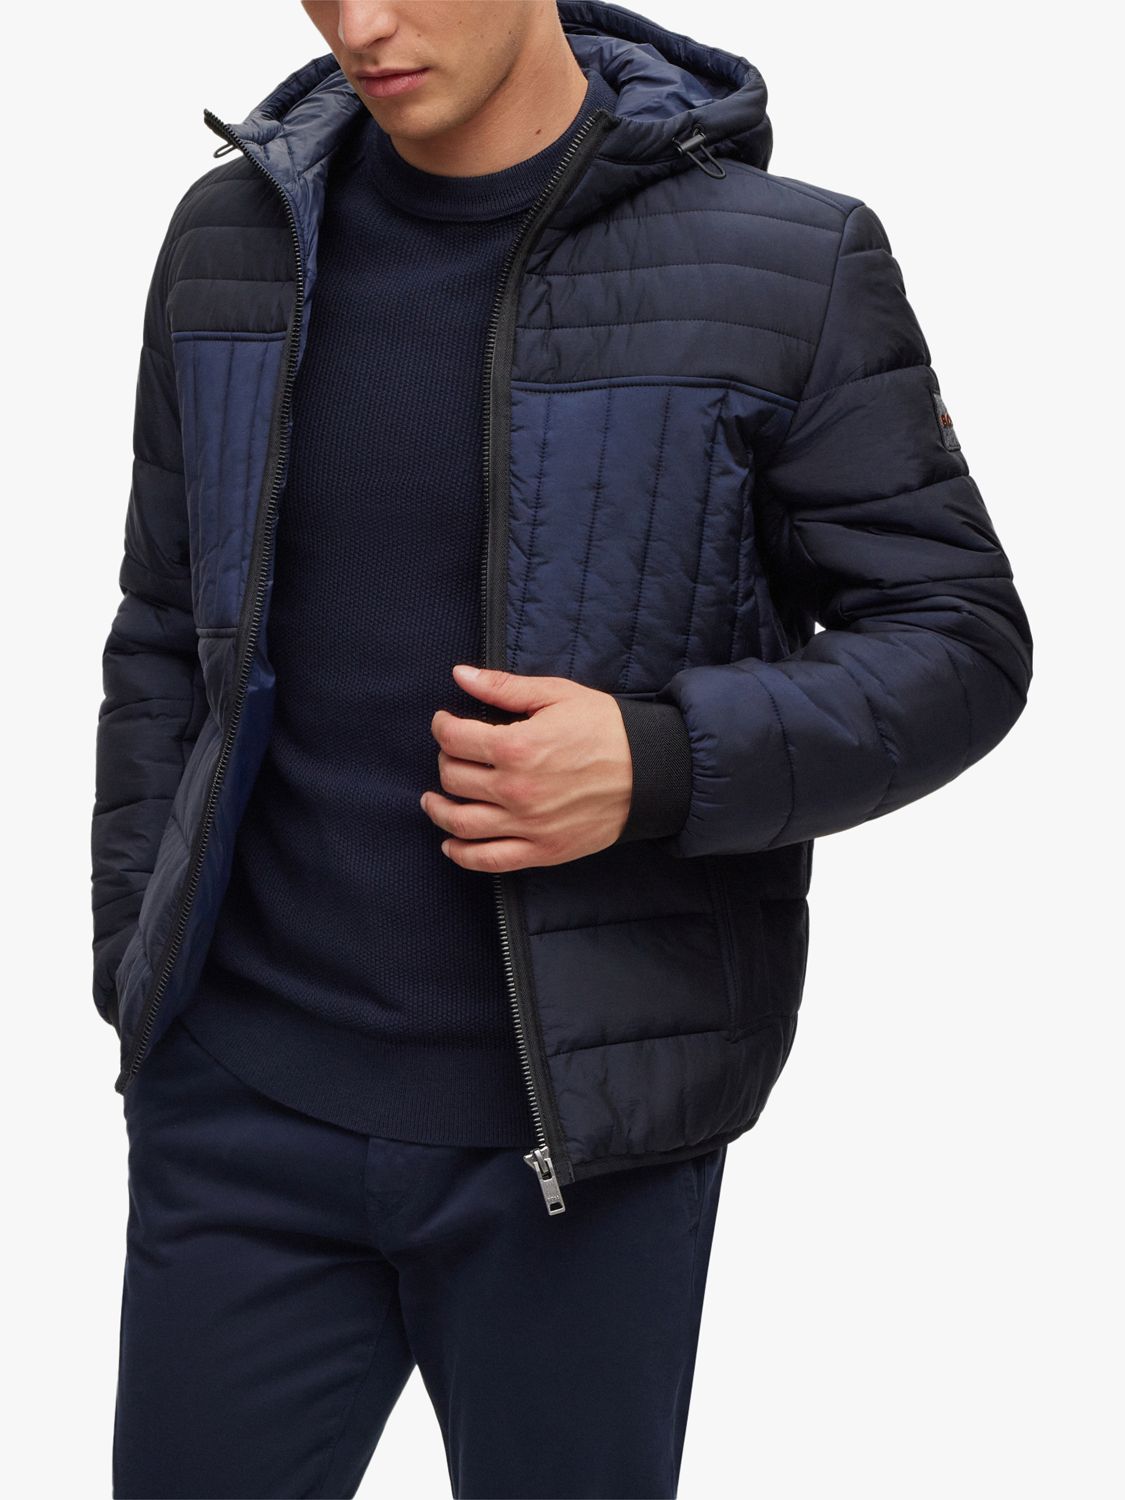 BOSS Omir Quilted Jacket, Dark Blue at John Lewis & Partners